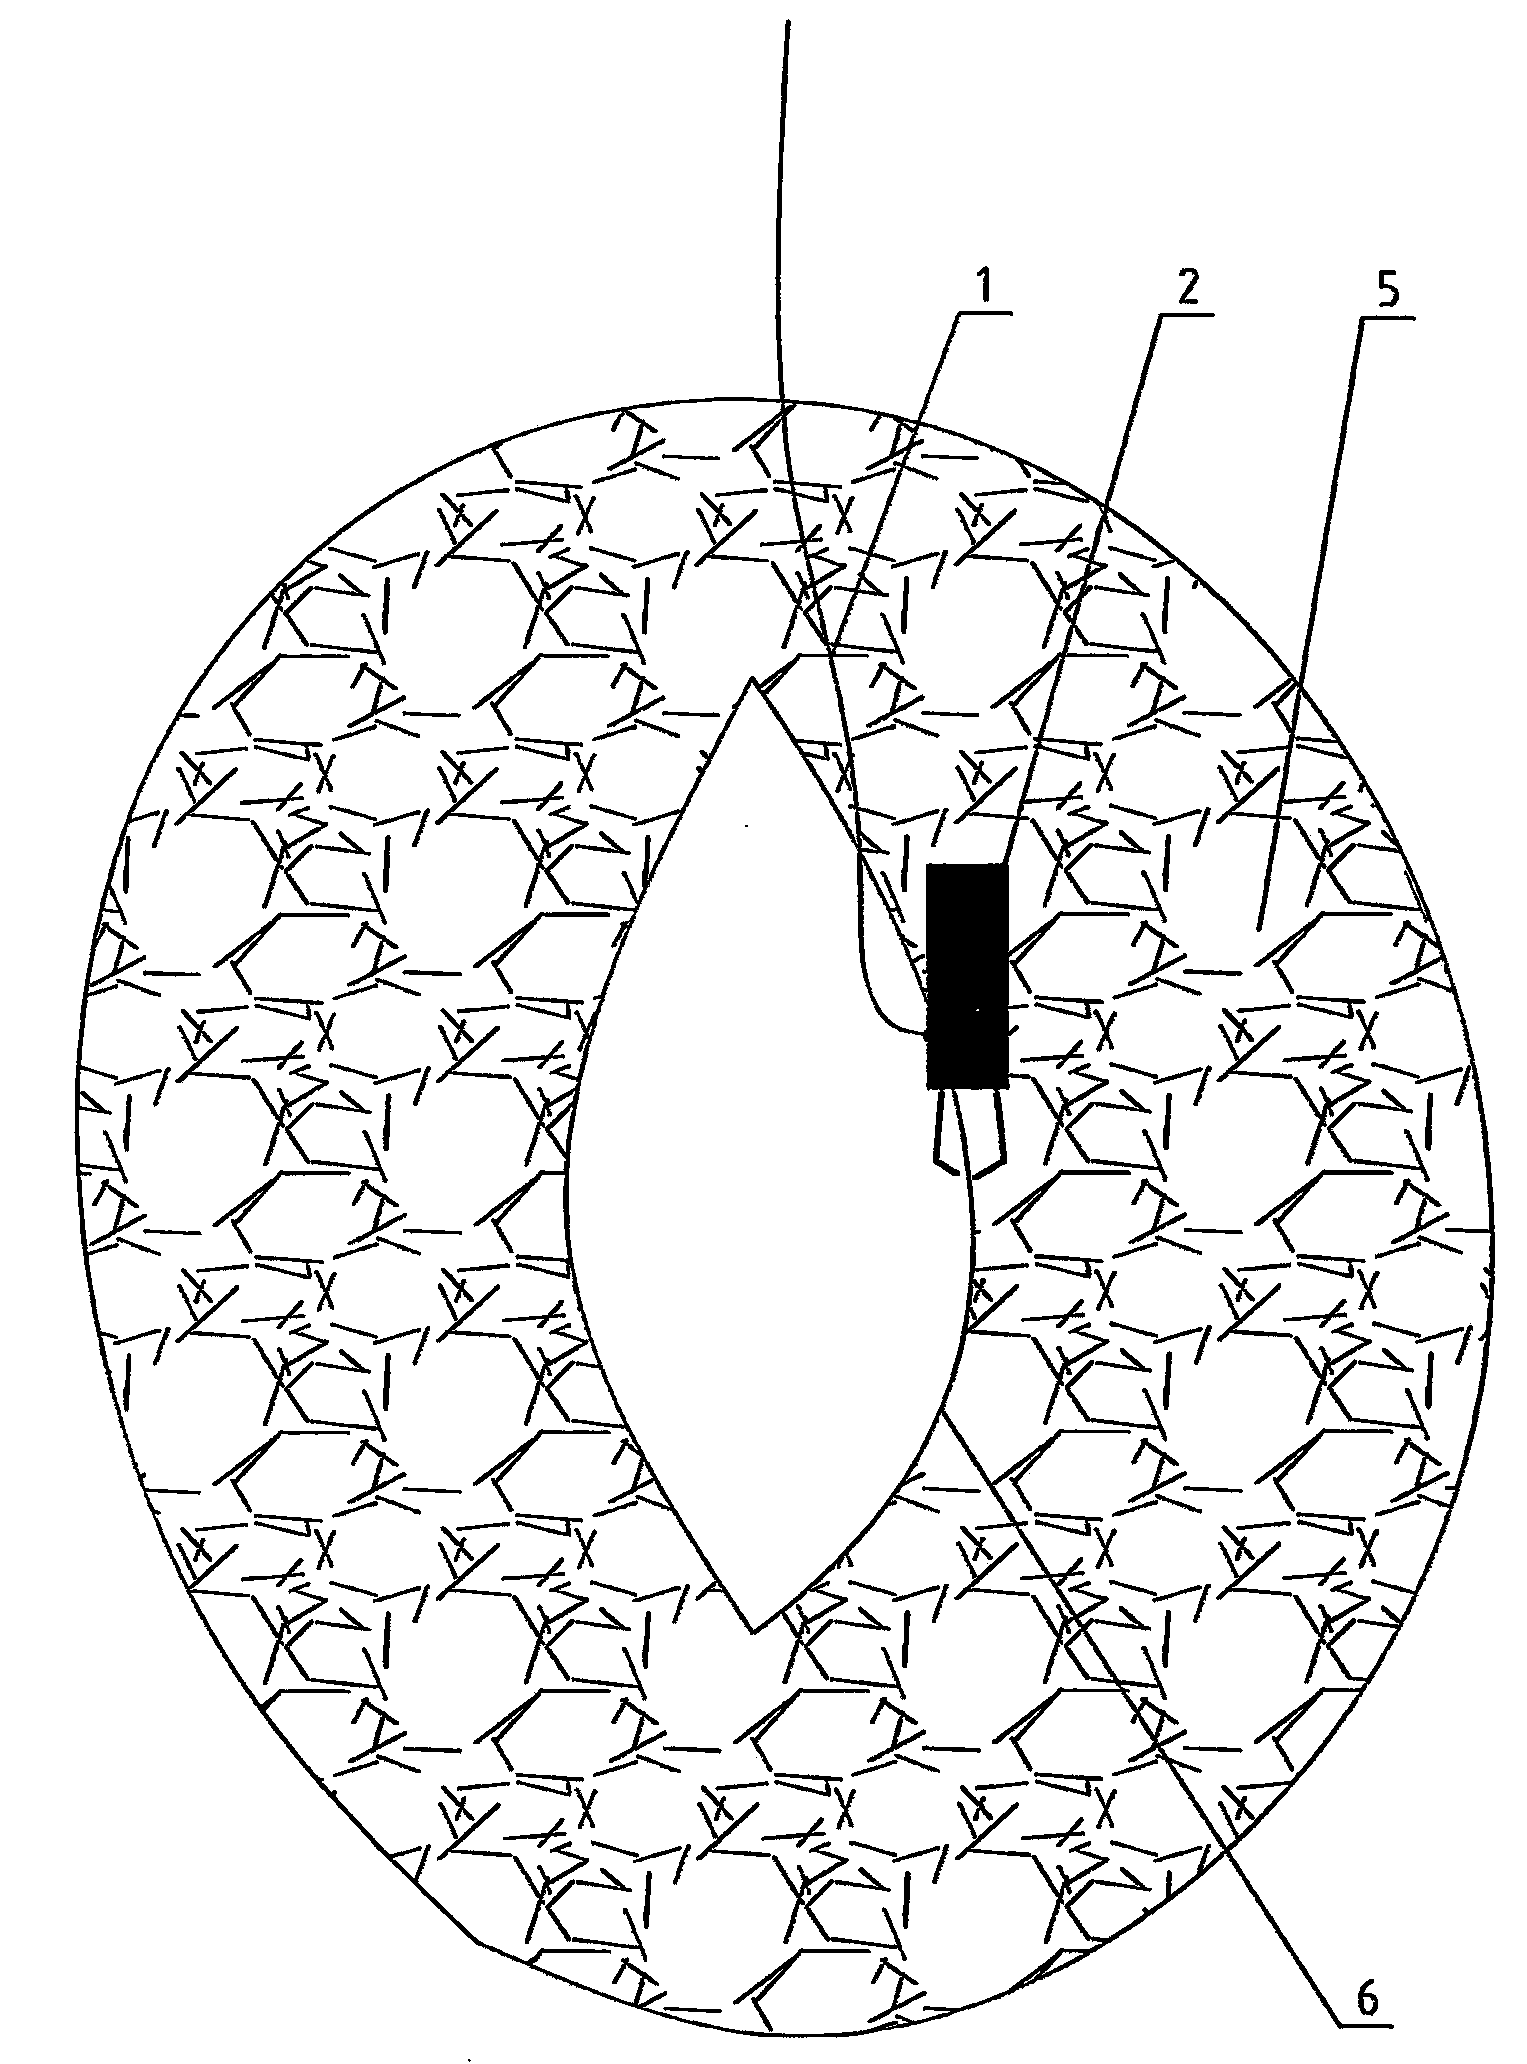 Combined tissue perforation suturing instrument